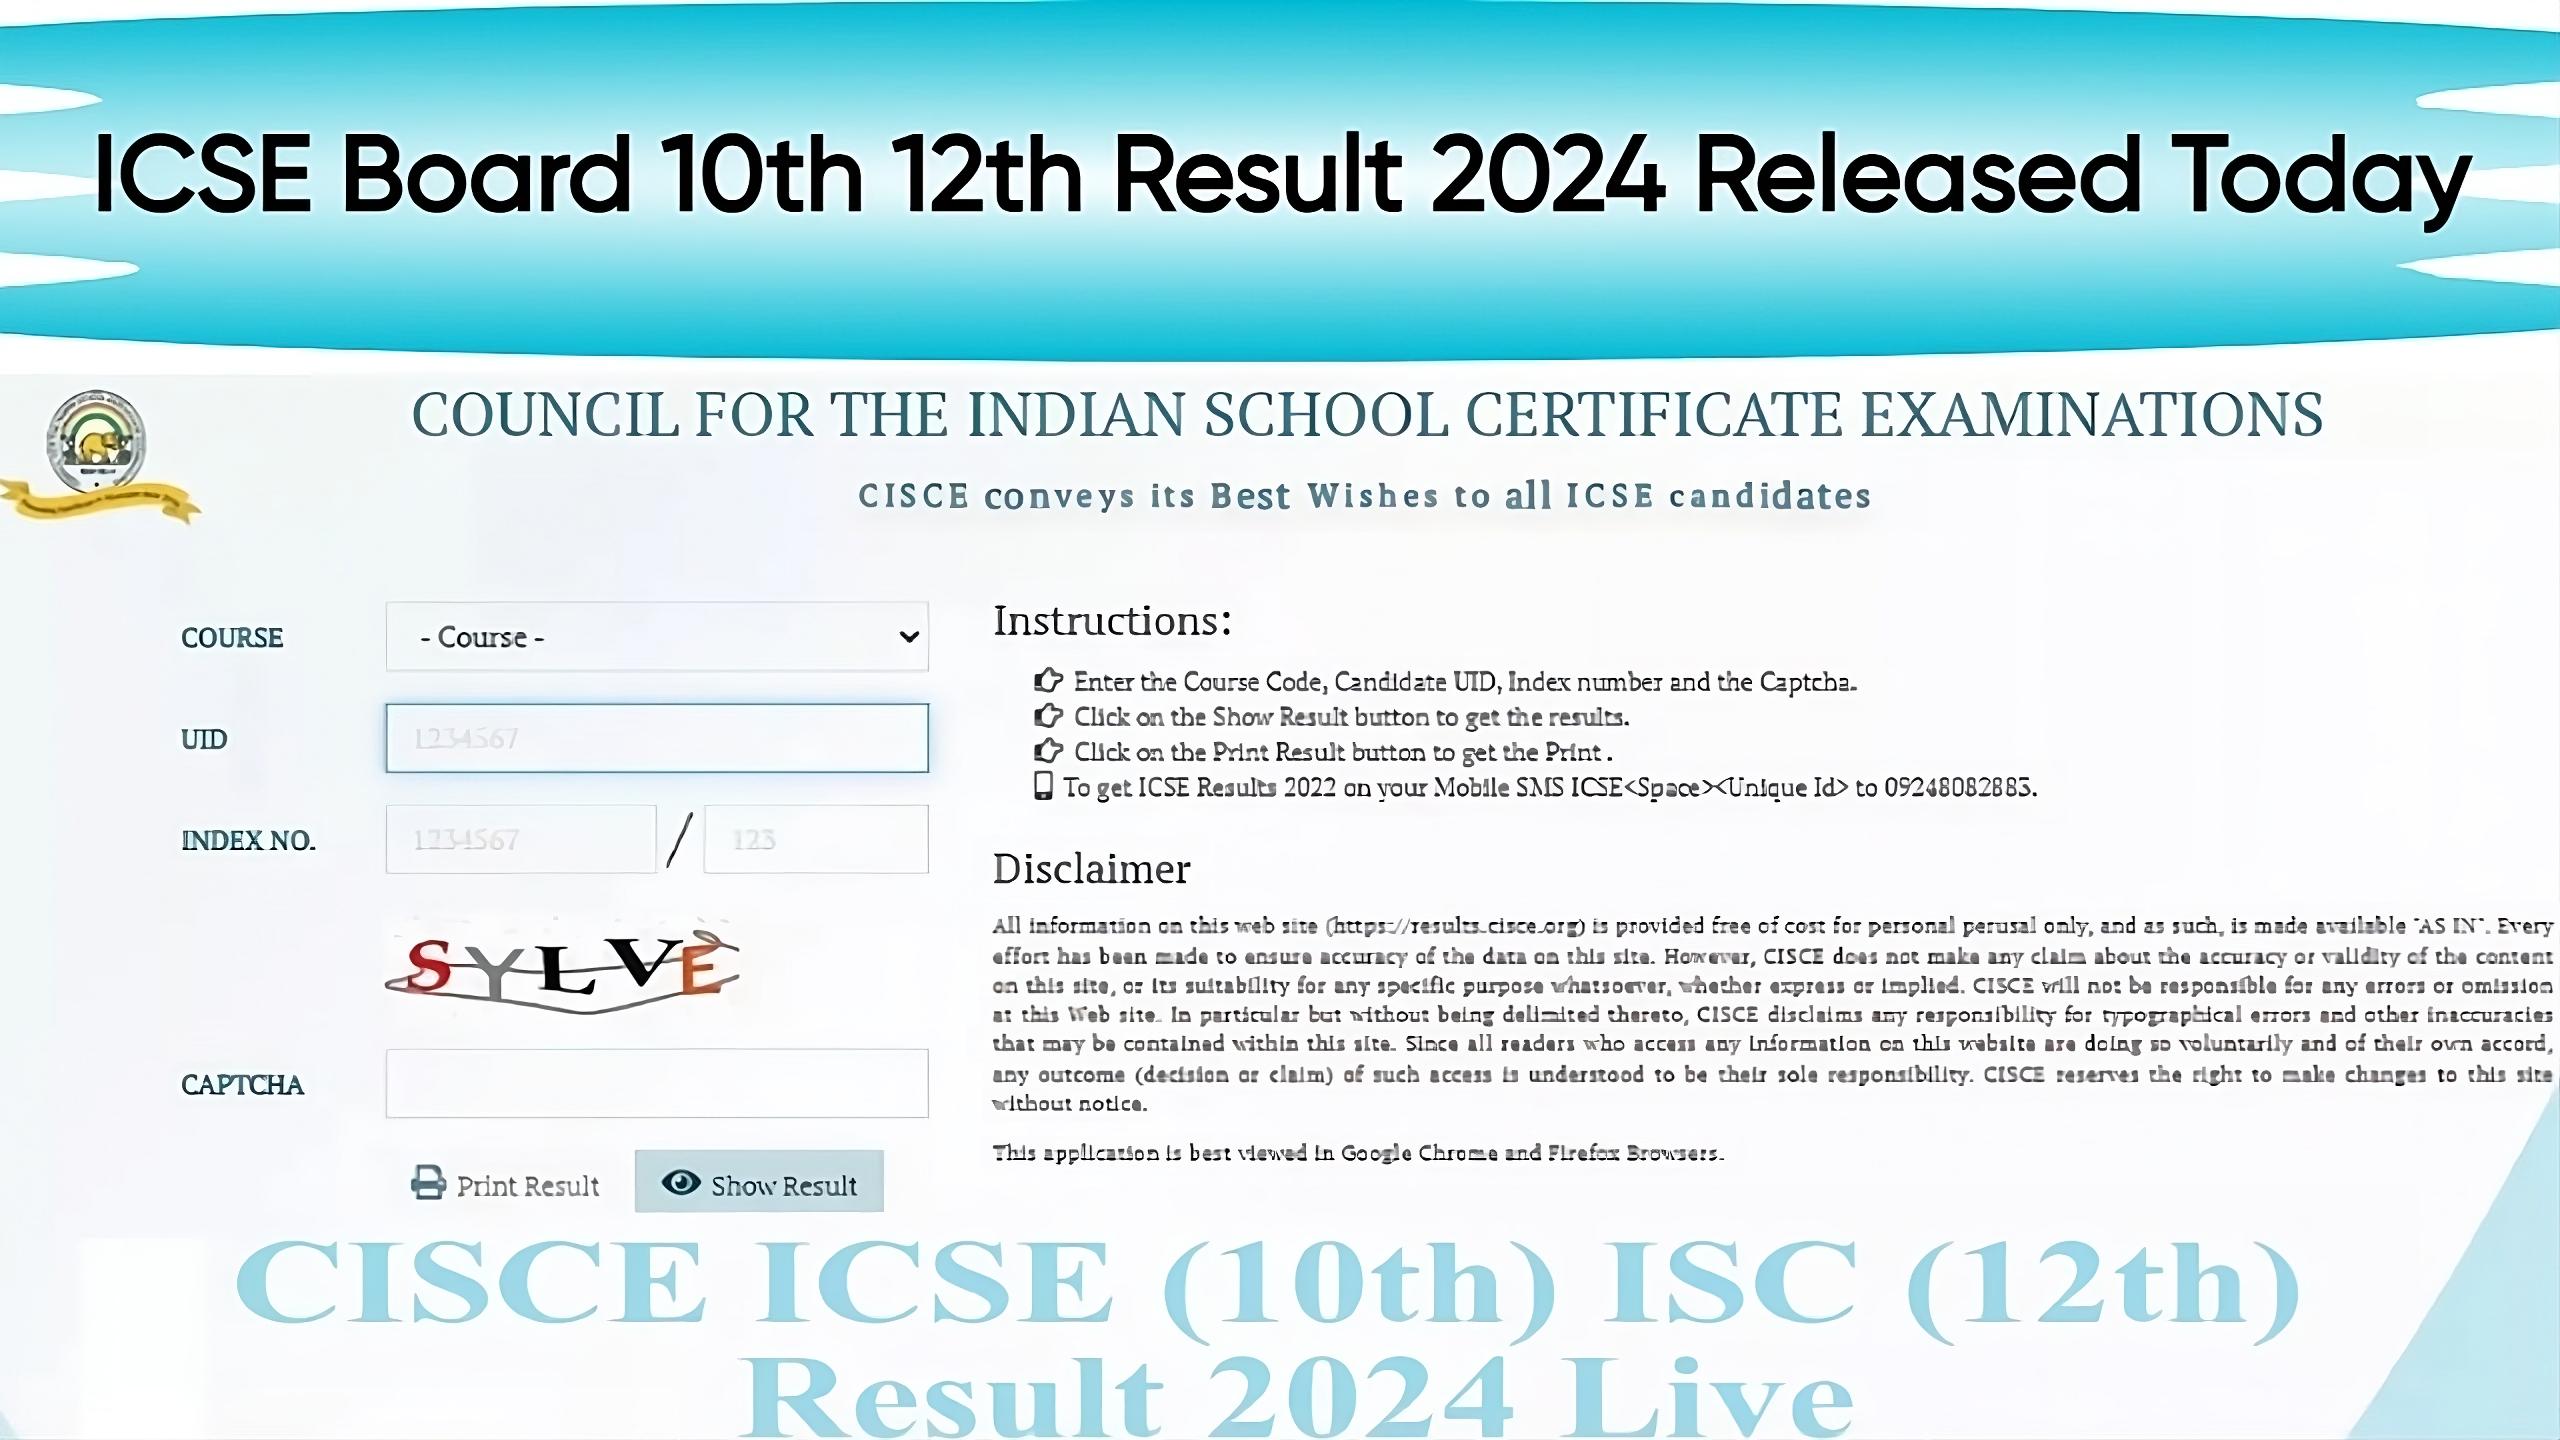 ICSE Board 10th 12th Result 2024 Released